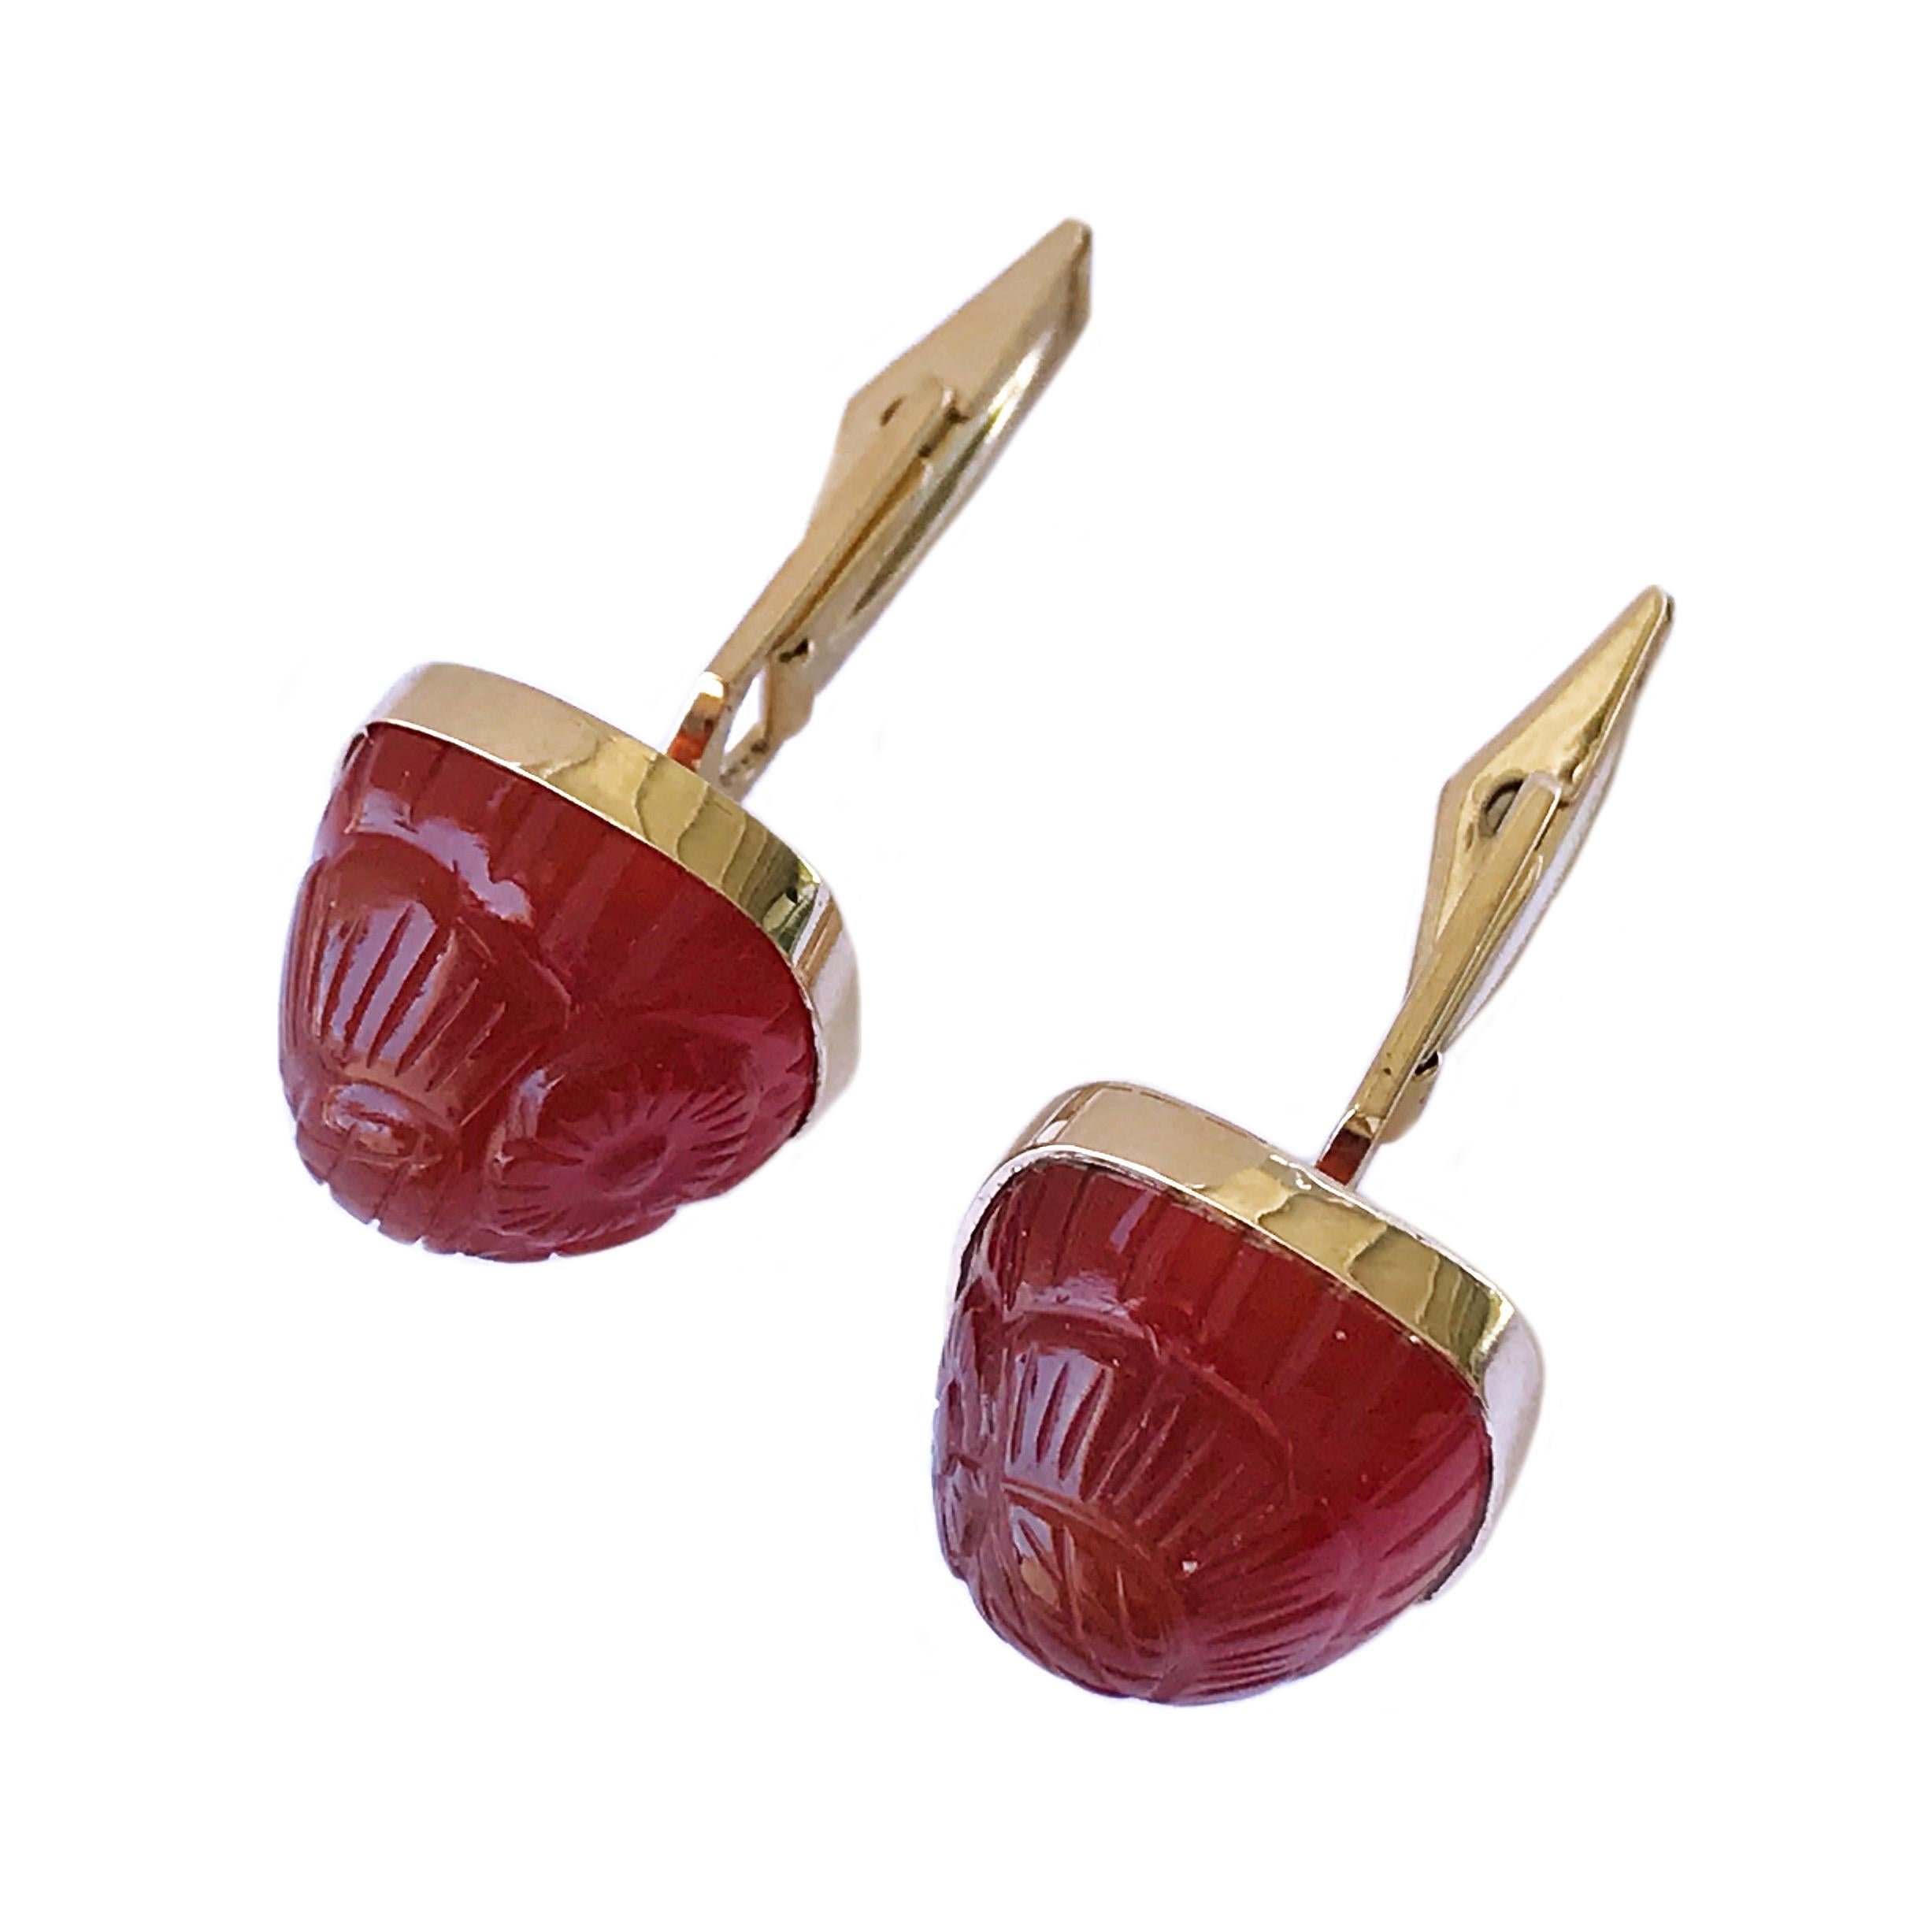 14 Karat Carved Carnelian Cufflinks. The front showcase carved Carnelian with a floral motif. The cufflinks have a smooth semi-smooth back, a dual post, and whale tail toggle backings. The cufflink measure approximately 15mm x 15mm. The cufflinks